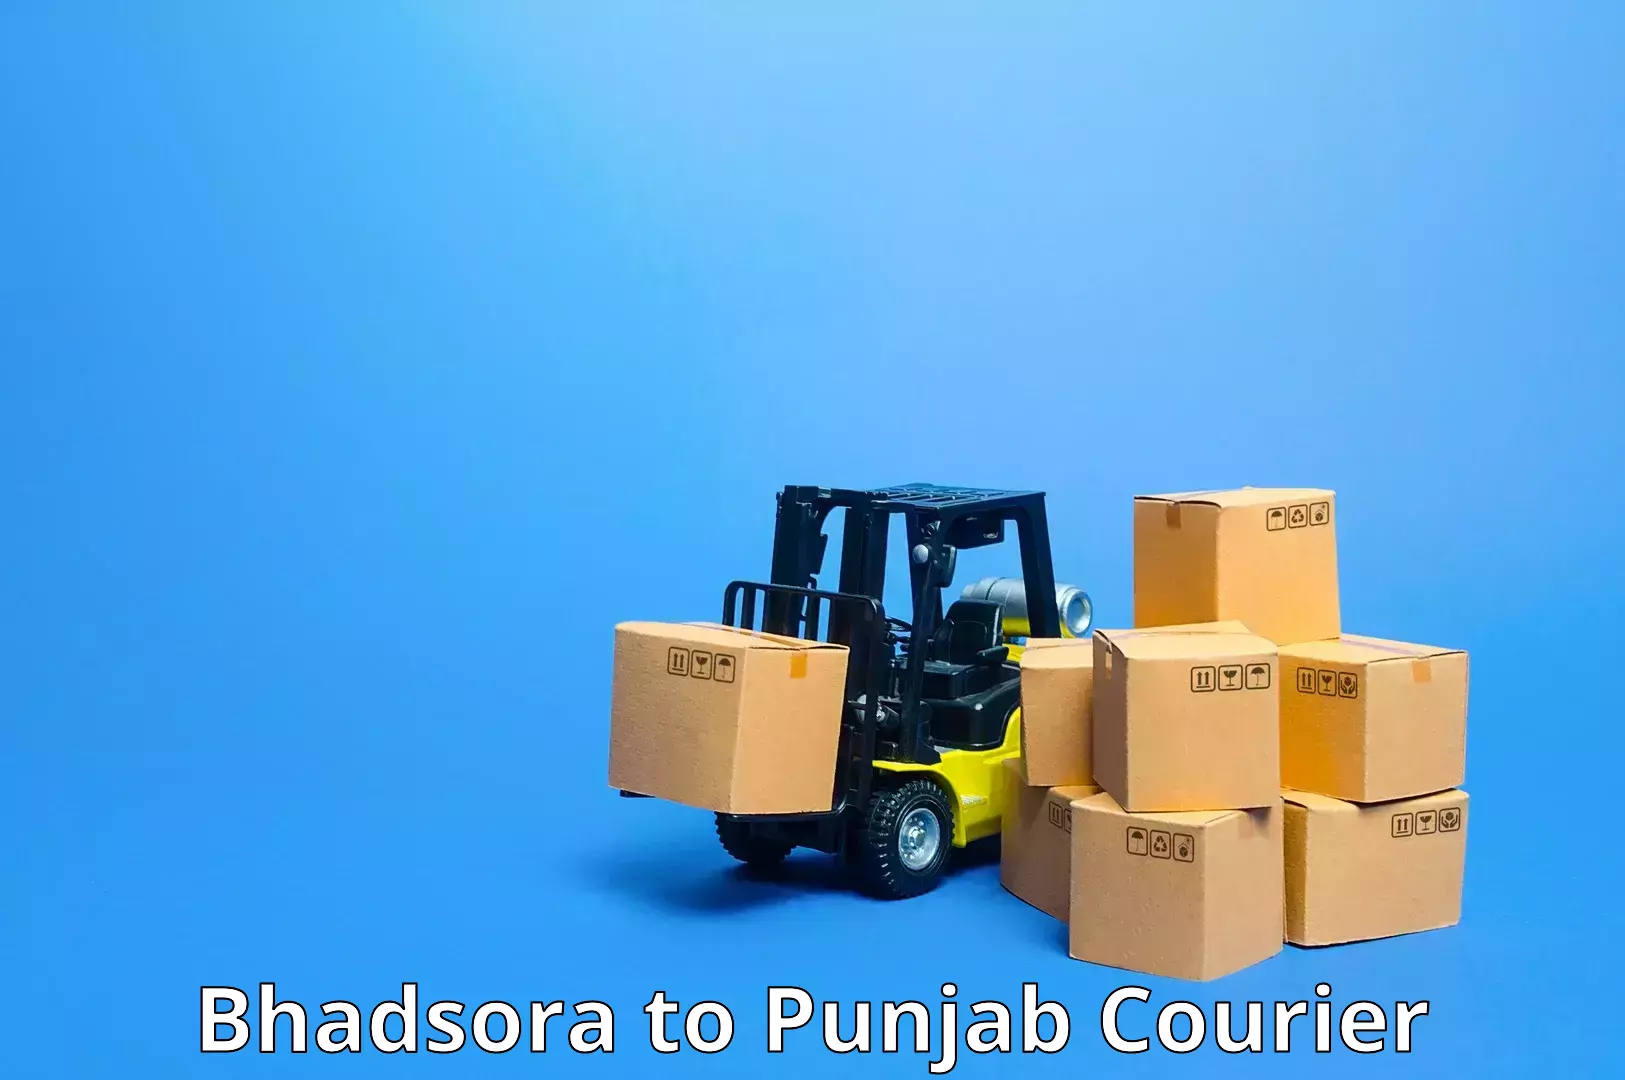 Customizable delivery plans Bhadsora to Sultanpur Lodhi